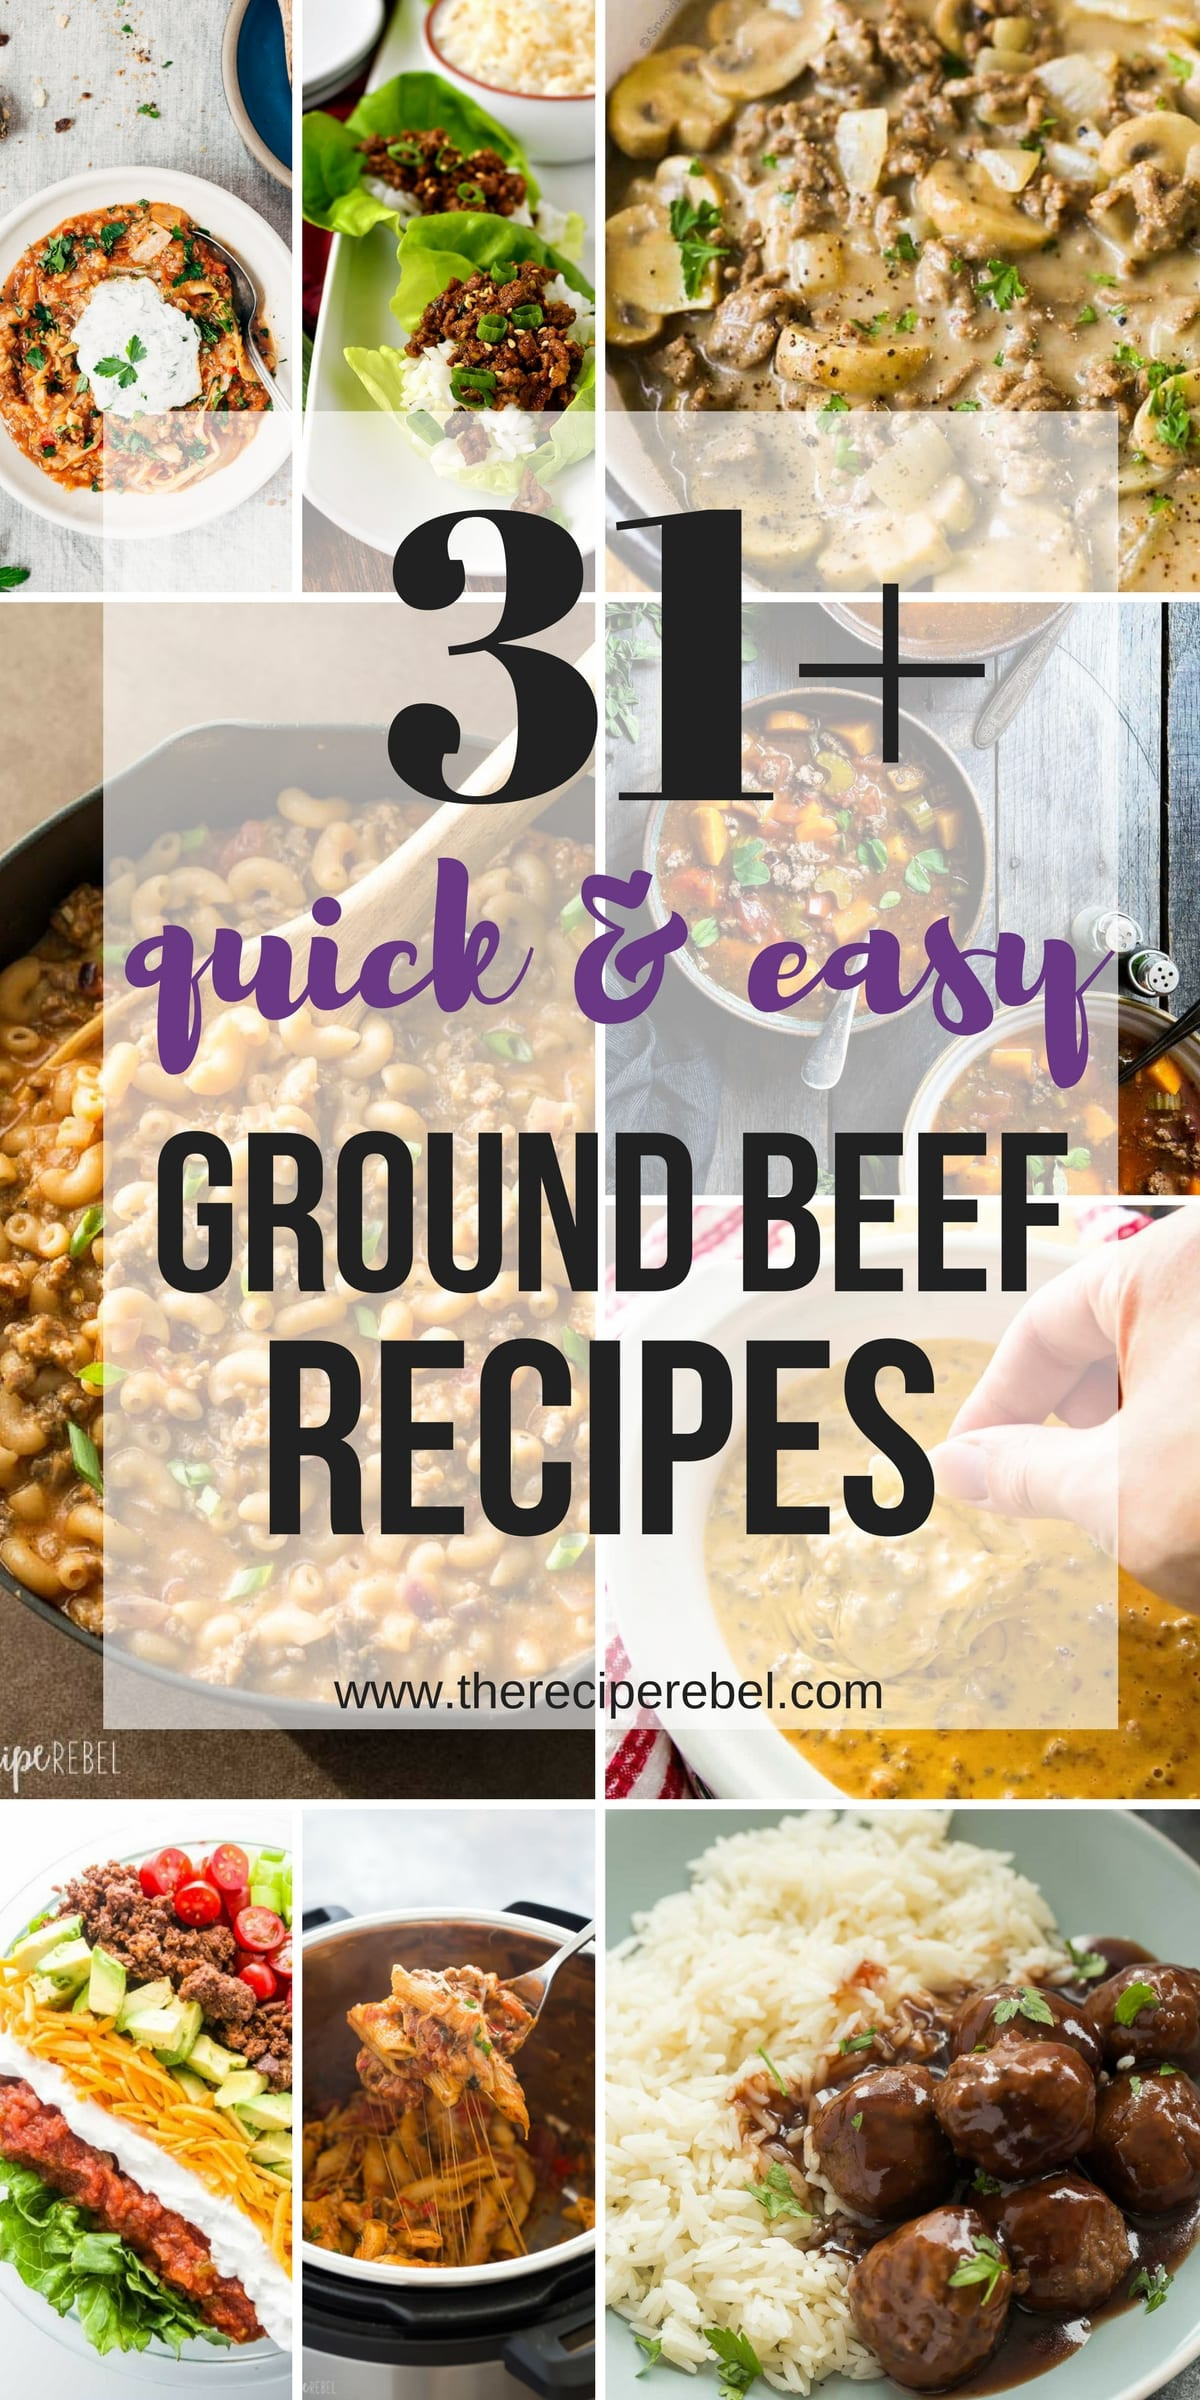 Quick Meals To Make With Ground Beef
 31 Quick Ground Beef Recipes easy family friendly